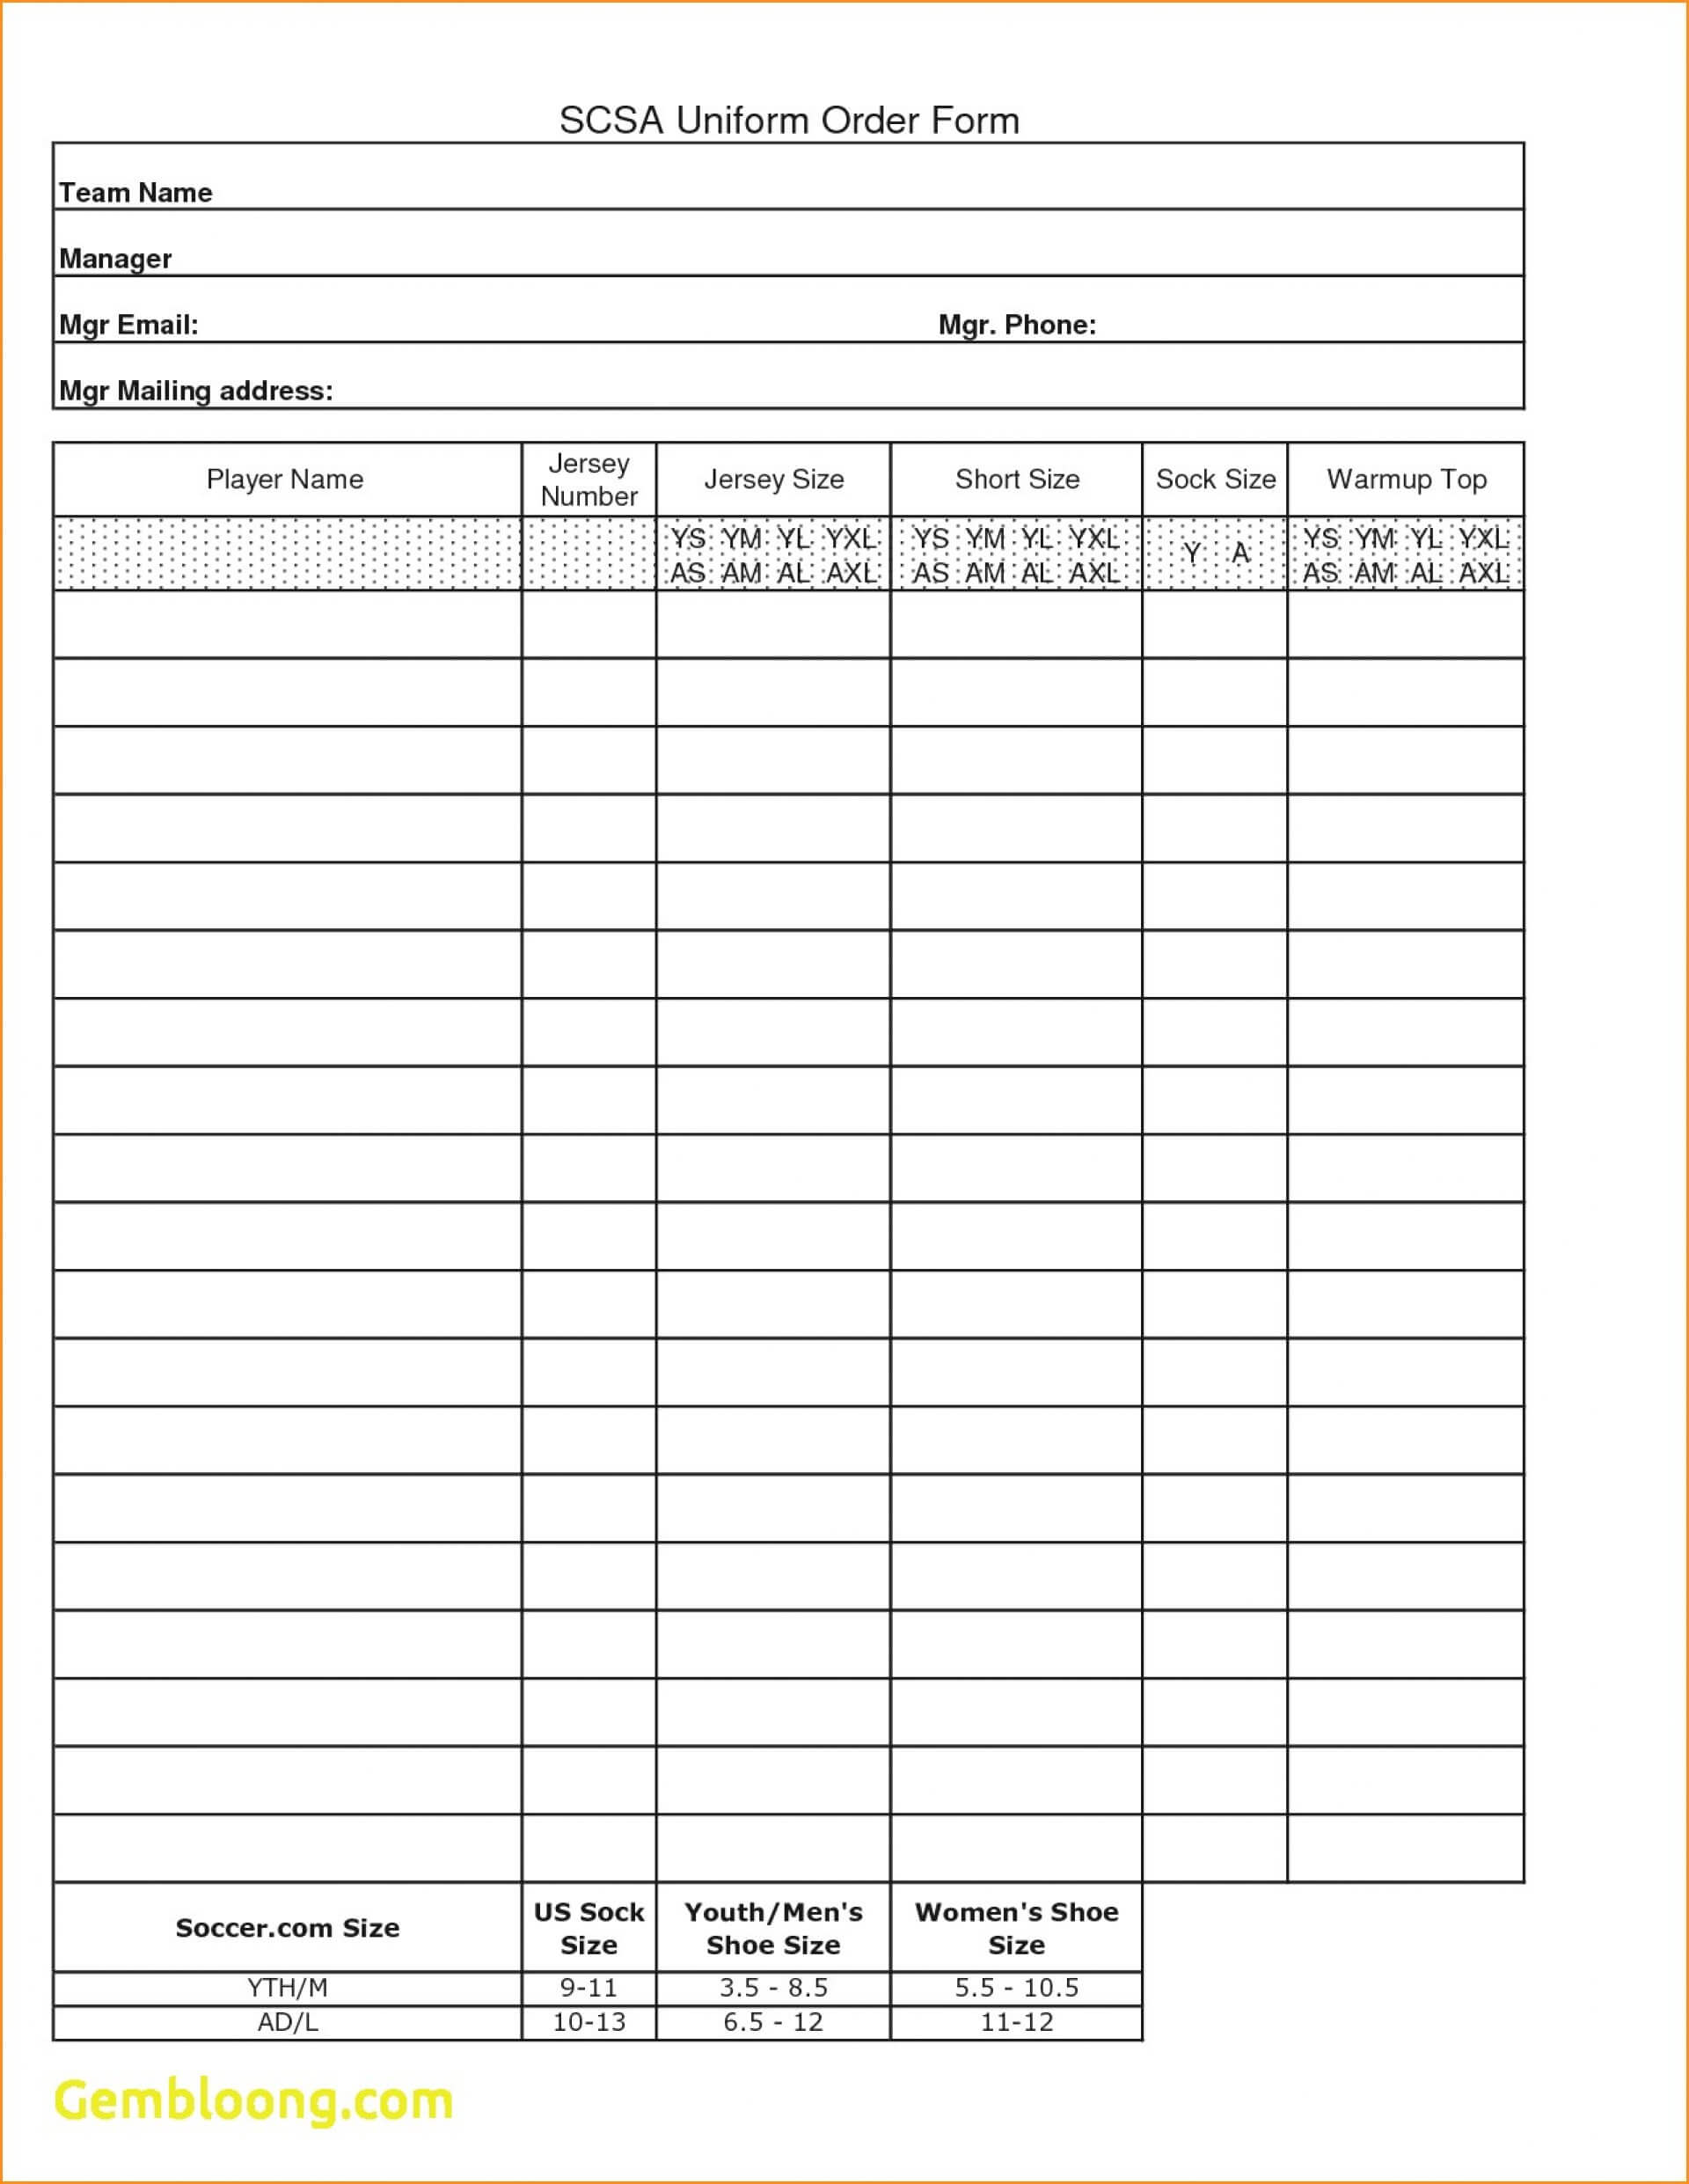 034 Blank Fundraiser Order Form Template Free Mary Resume Pertaining To Blank Fundraiser Order Form Template